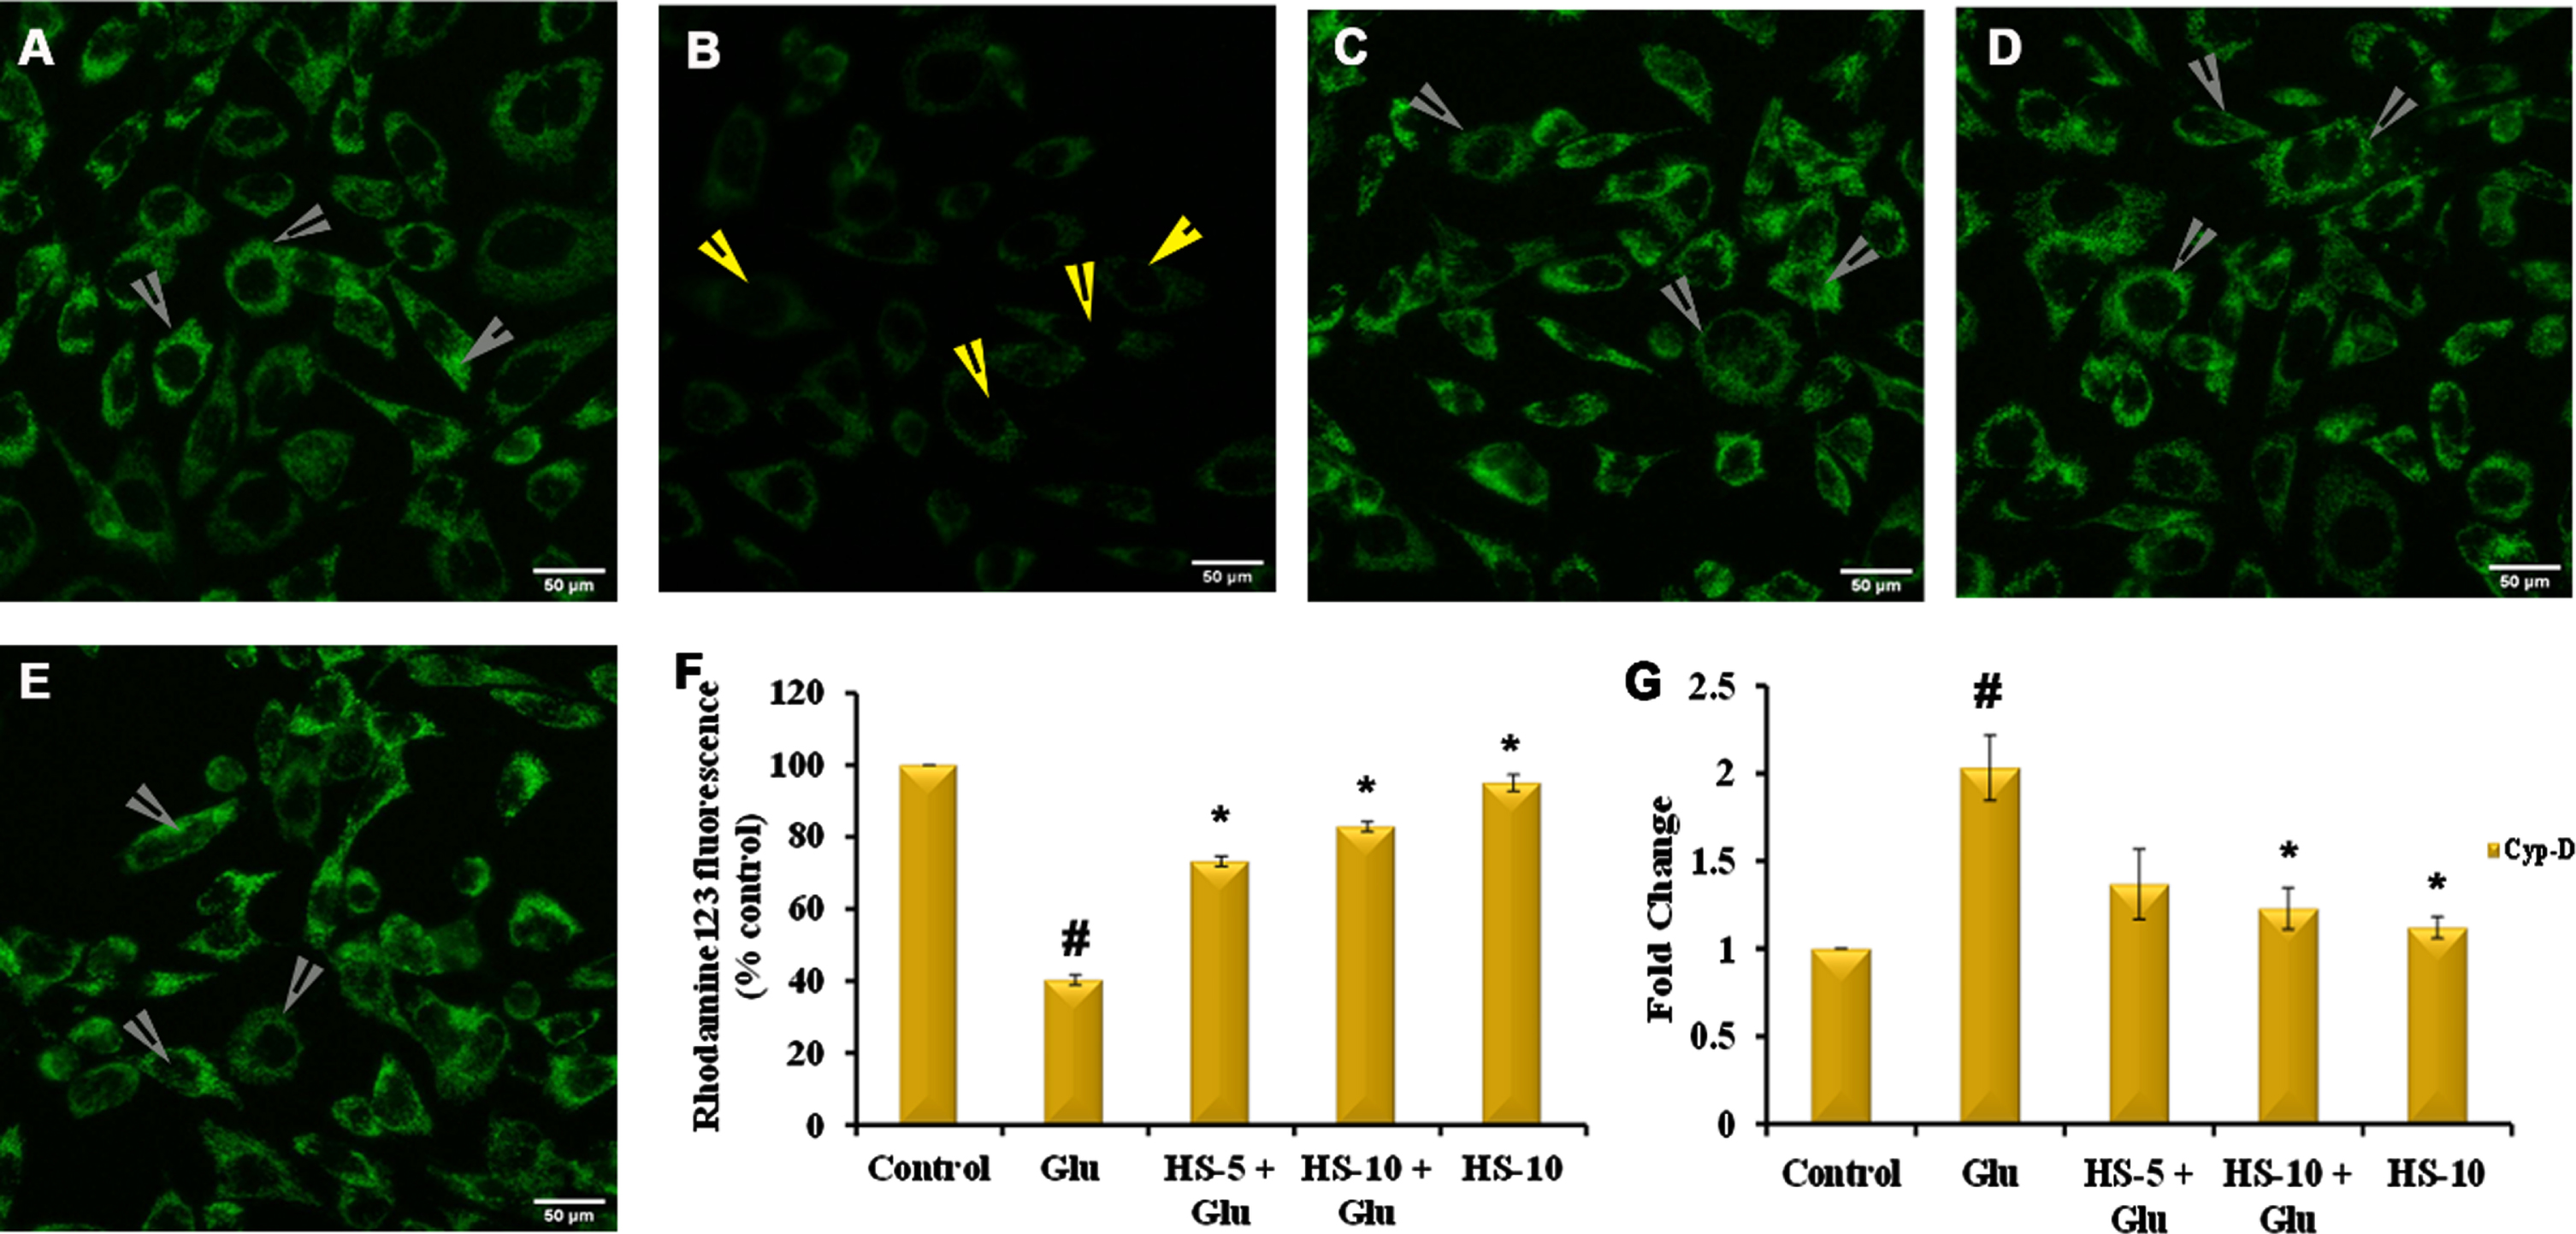 Confocal microscopic examination of alteration in mitochondrial membrane potential by HS (A) Control (B) Glutamate (5 mM) (C) HS-5 + glutamate (D) HS-10 + glutamate (E) HS-10 (Yellow arrows indicating loss of MMP and white arrows indicating restoration of MMP) (F) Quantitative analysis of Rh 123 fluorescence (G) Transcriptional regulation of Cyp-D by HS (Significance at p < 0.05; # Control vs Glutamate; * Glutamate vs HS treated; n = 3; scale bar –50μm).